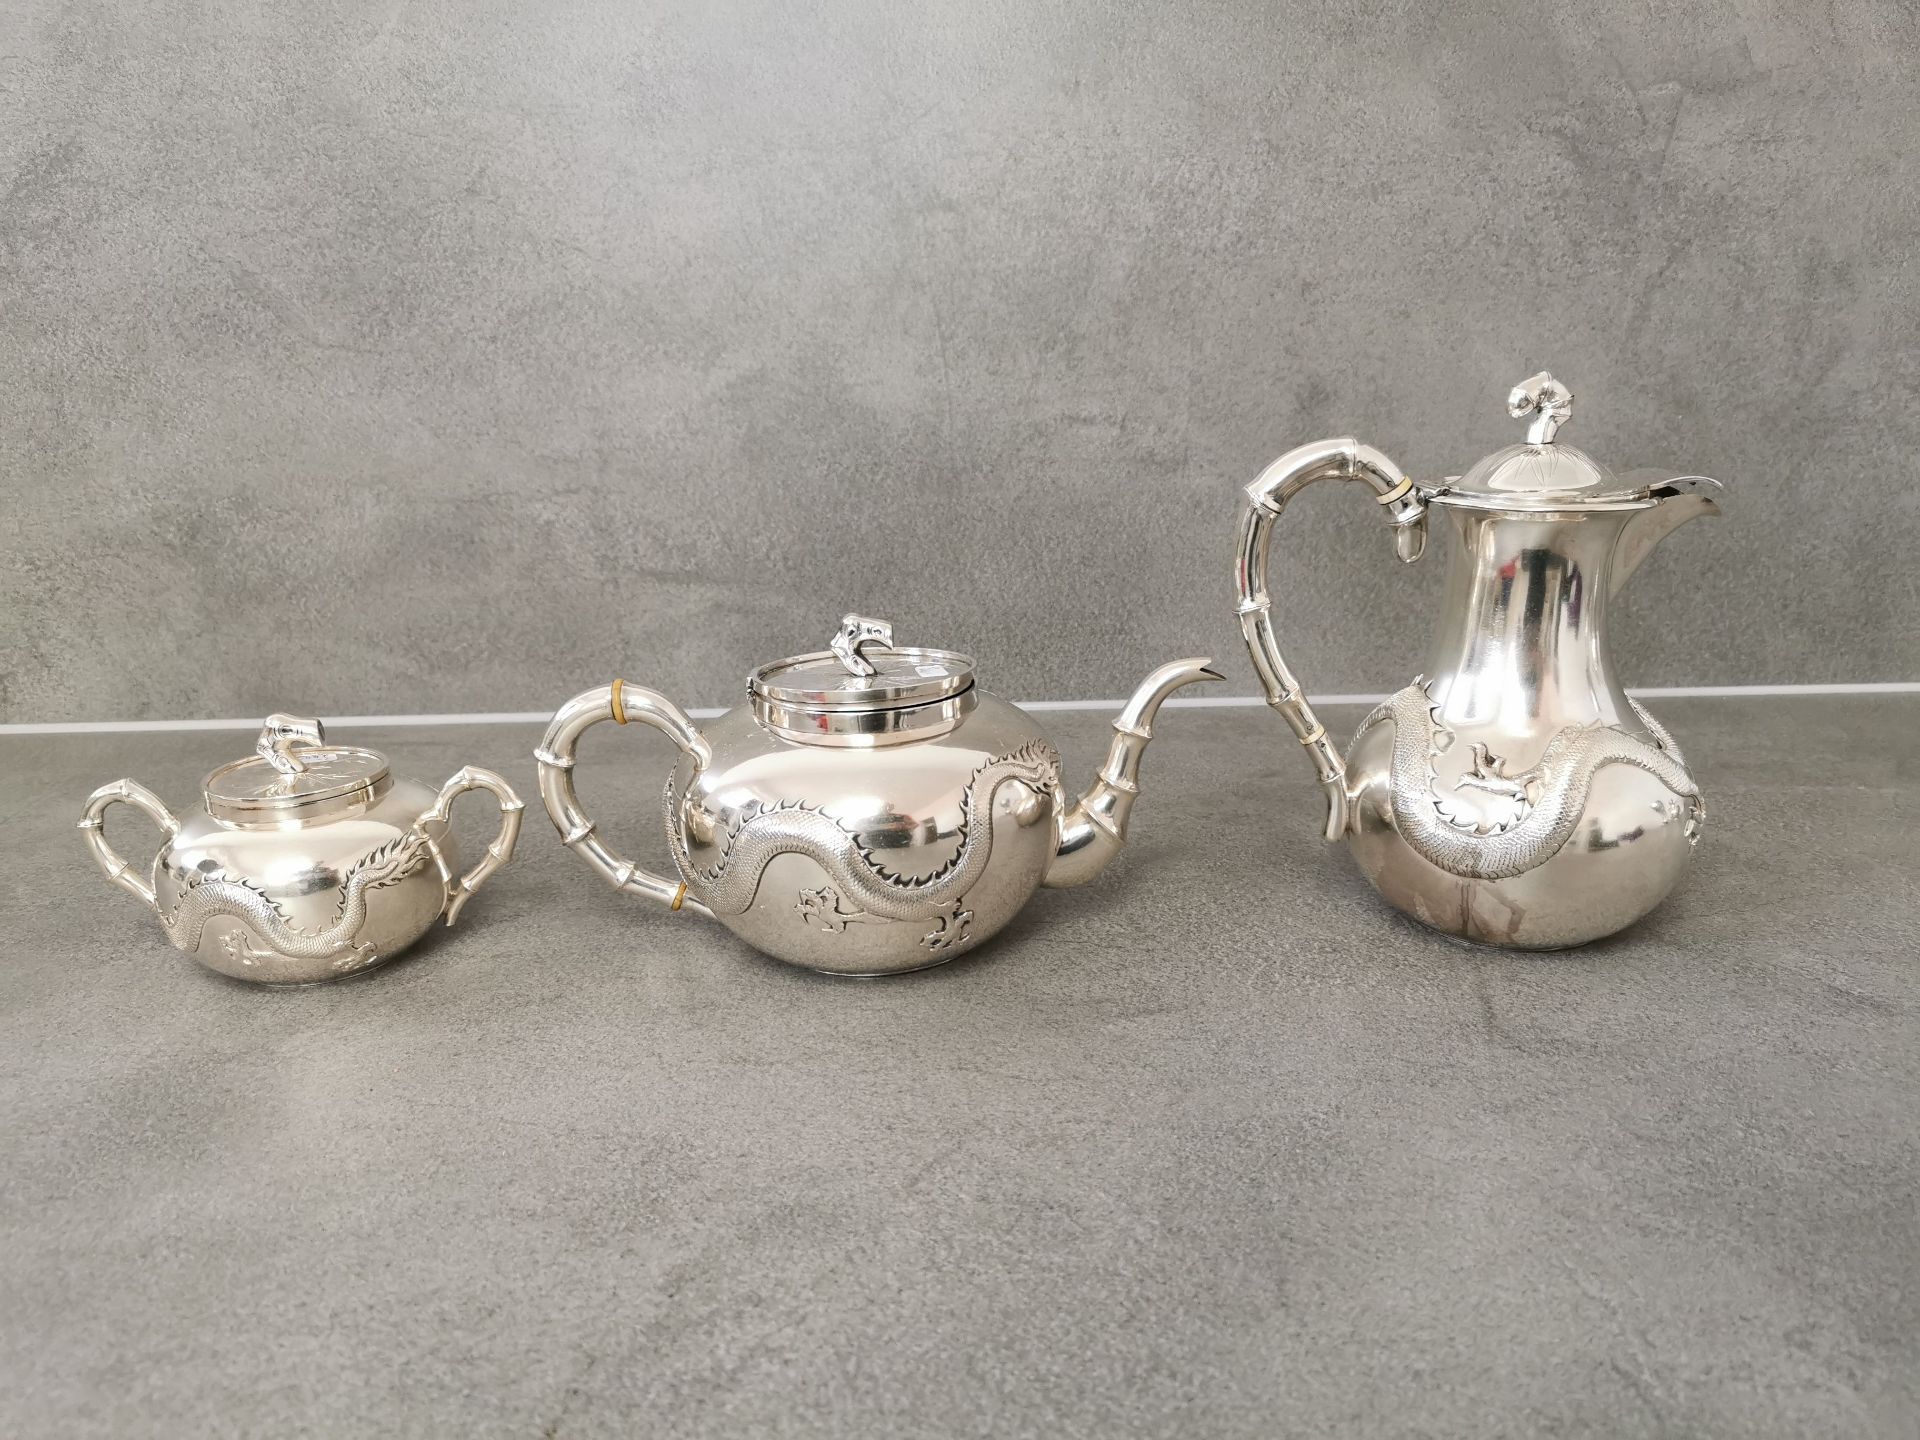 CHINESE EXPORT PORCELAIN: TEAPOT, COFFEE POT AND SUGAR POT - Image 5 of 6